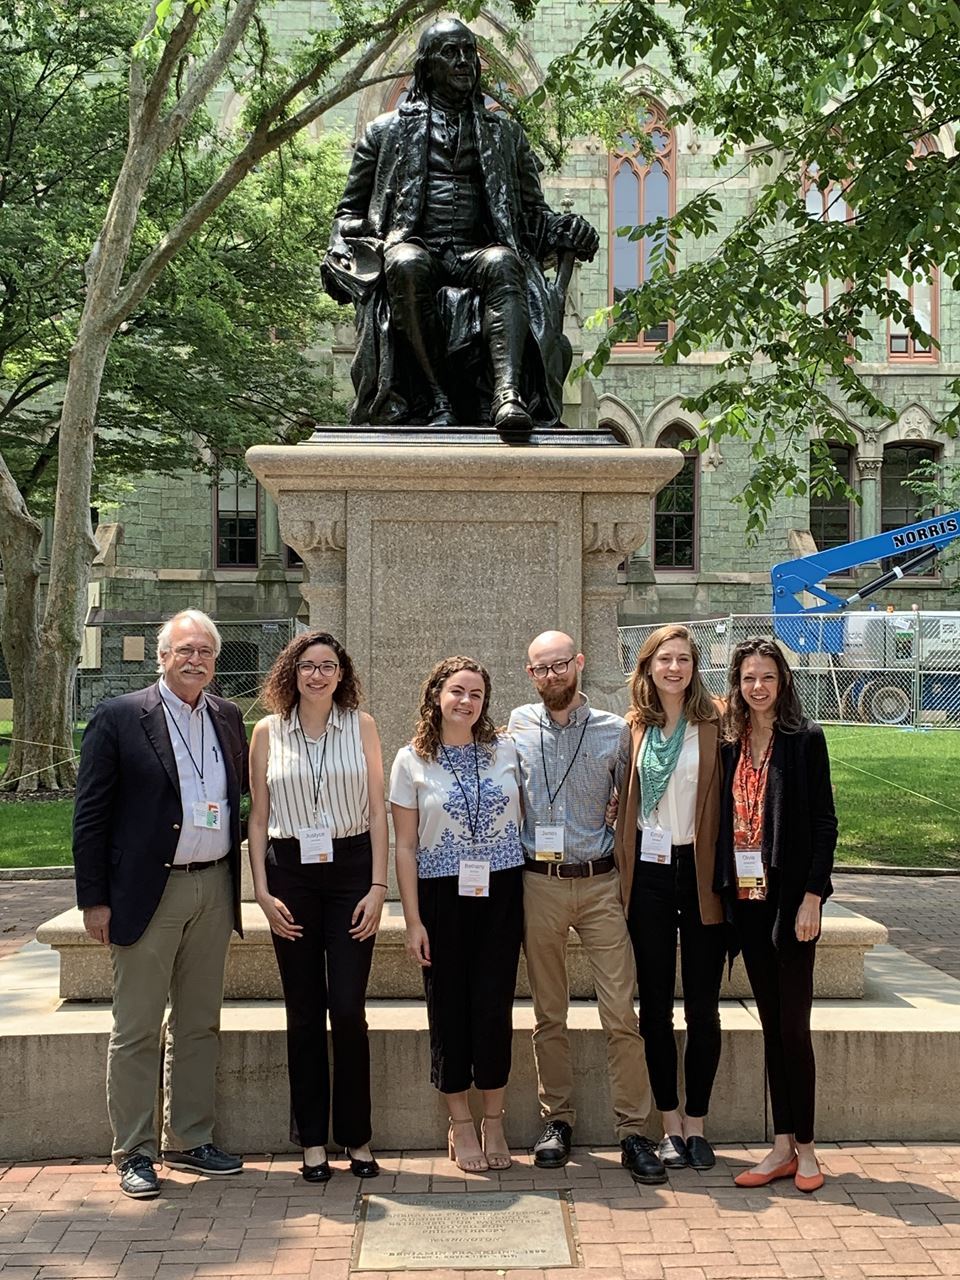 University of Delaware Ambassadors in front of Ben Franklin statue. L to R Ritchie Garrison (Director of Winterthur Program), Justyce Bennett (Winterthur, Class of 2021), Bethany McGlyn (Winterthur, Class of 2020), James Kelleher (Winterthur, Class of 2020), Emily Whitted (Winterthur, Class of 2020), and Olivia Armandroff (Winterthur, Class of 2020)